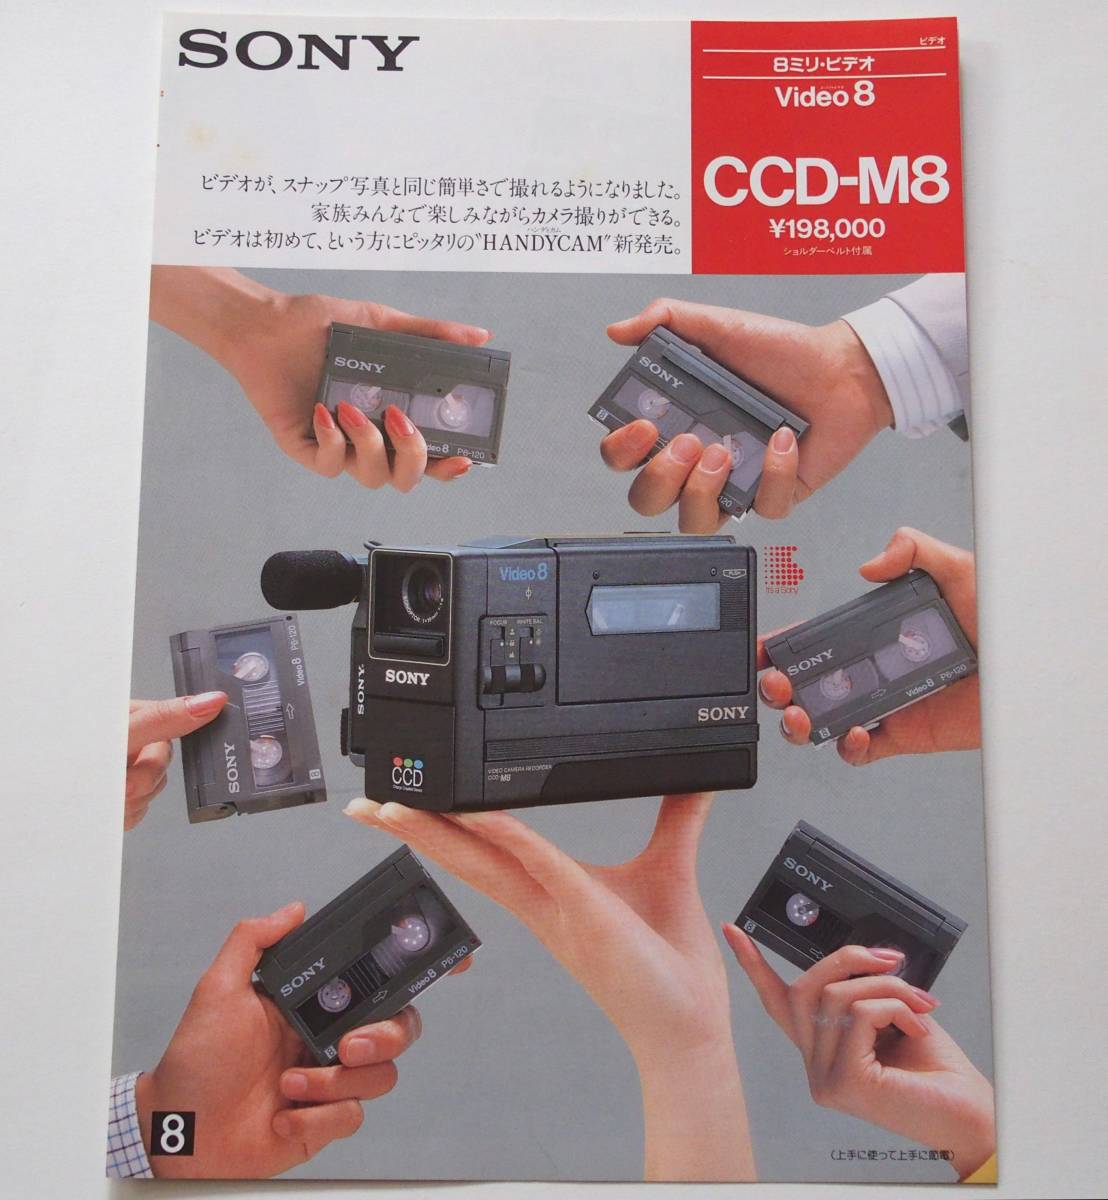 [ catalog 2 part set ][SONY 8 millimeter video Video8 CCD-M8 catalog ]/[SONY 8 millimeter video Video8 EV-C8 catalog ](1985 year 9 month )